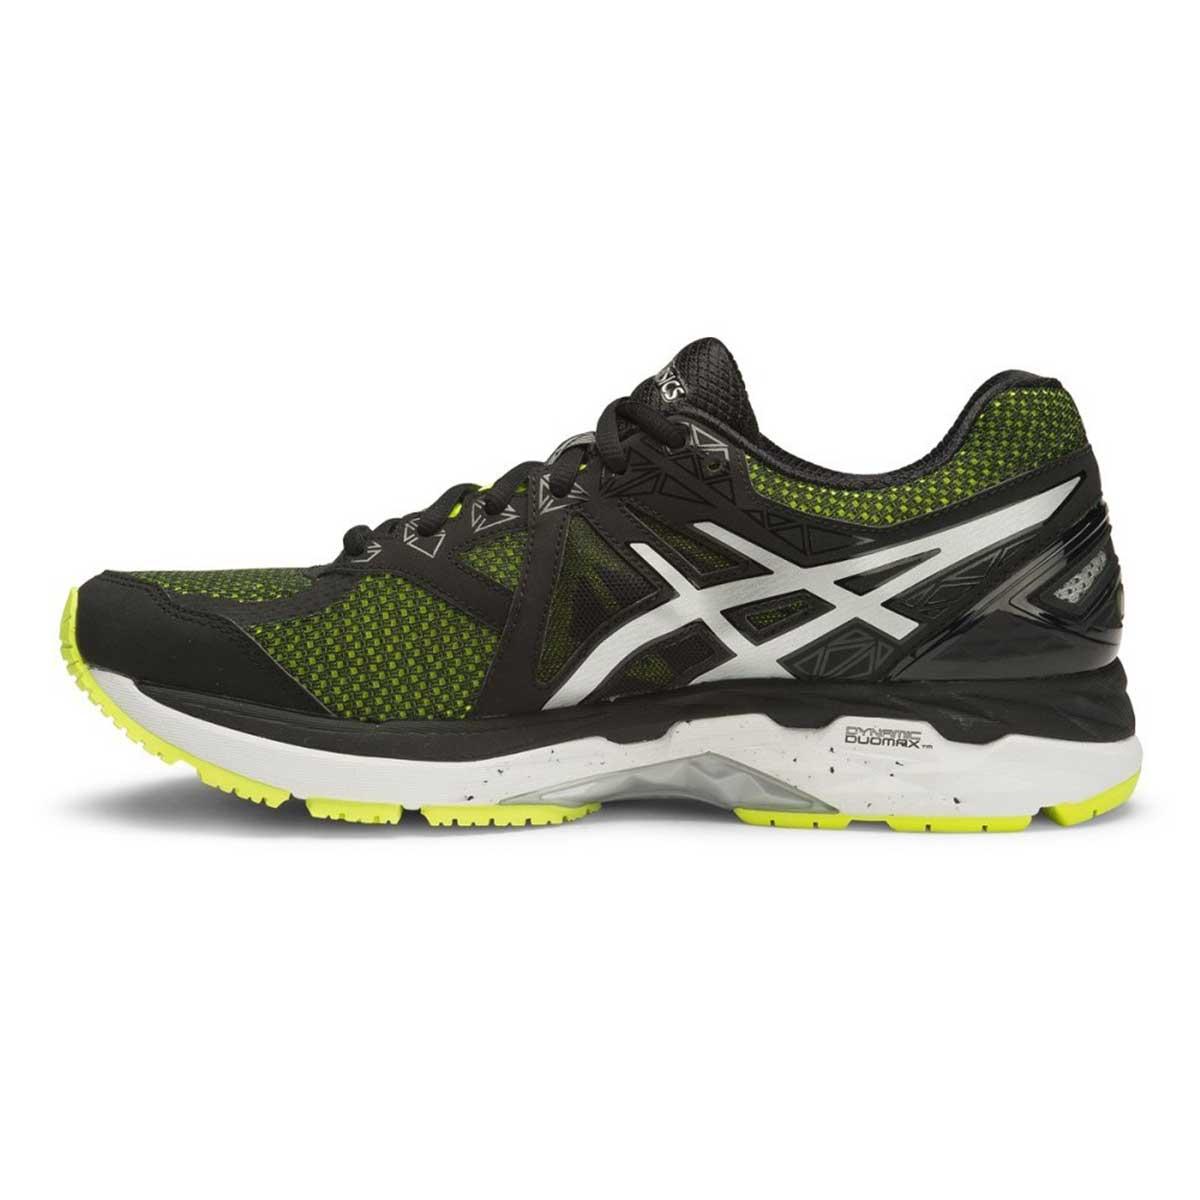 Buy Asics GT-2000 4 Running Shoes (Flash Yellow/Black/Silver) Online